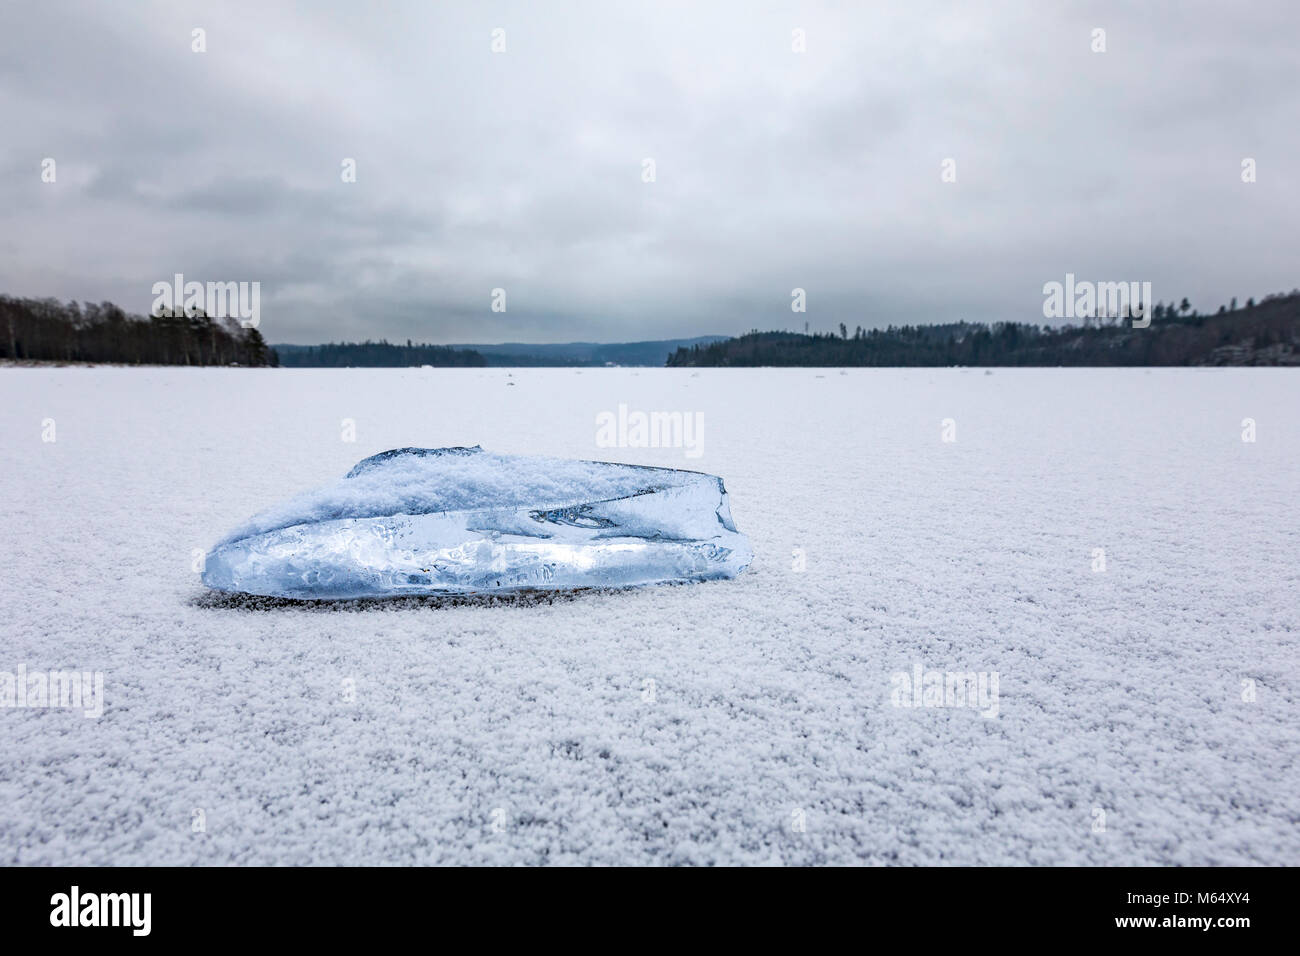 Low angle view of block of clear ice with a blue tint on top of snow and ice covered lake set againt dark winter landscape scenic  Model Release: No. Property Release: No. Stock Photo